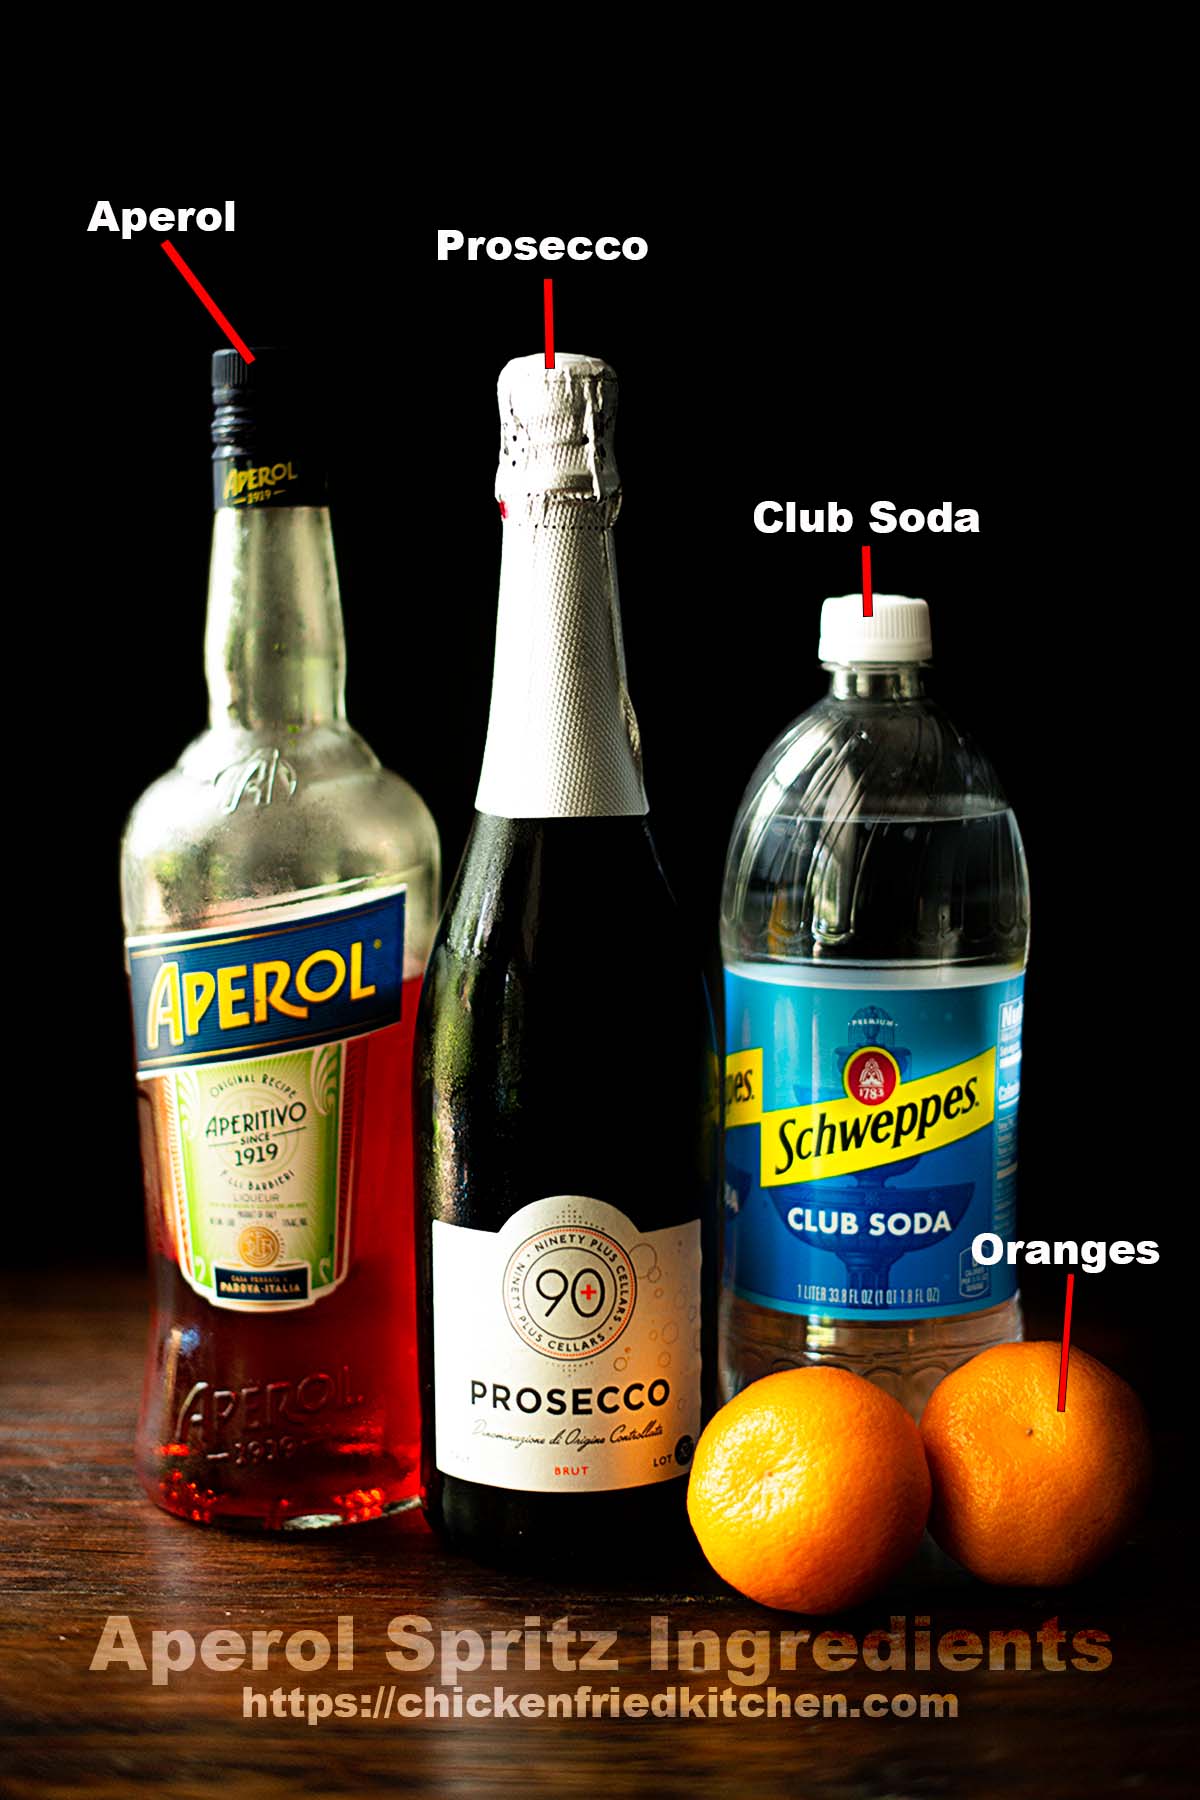 Aperol Spritz ingredients pictured and listed.